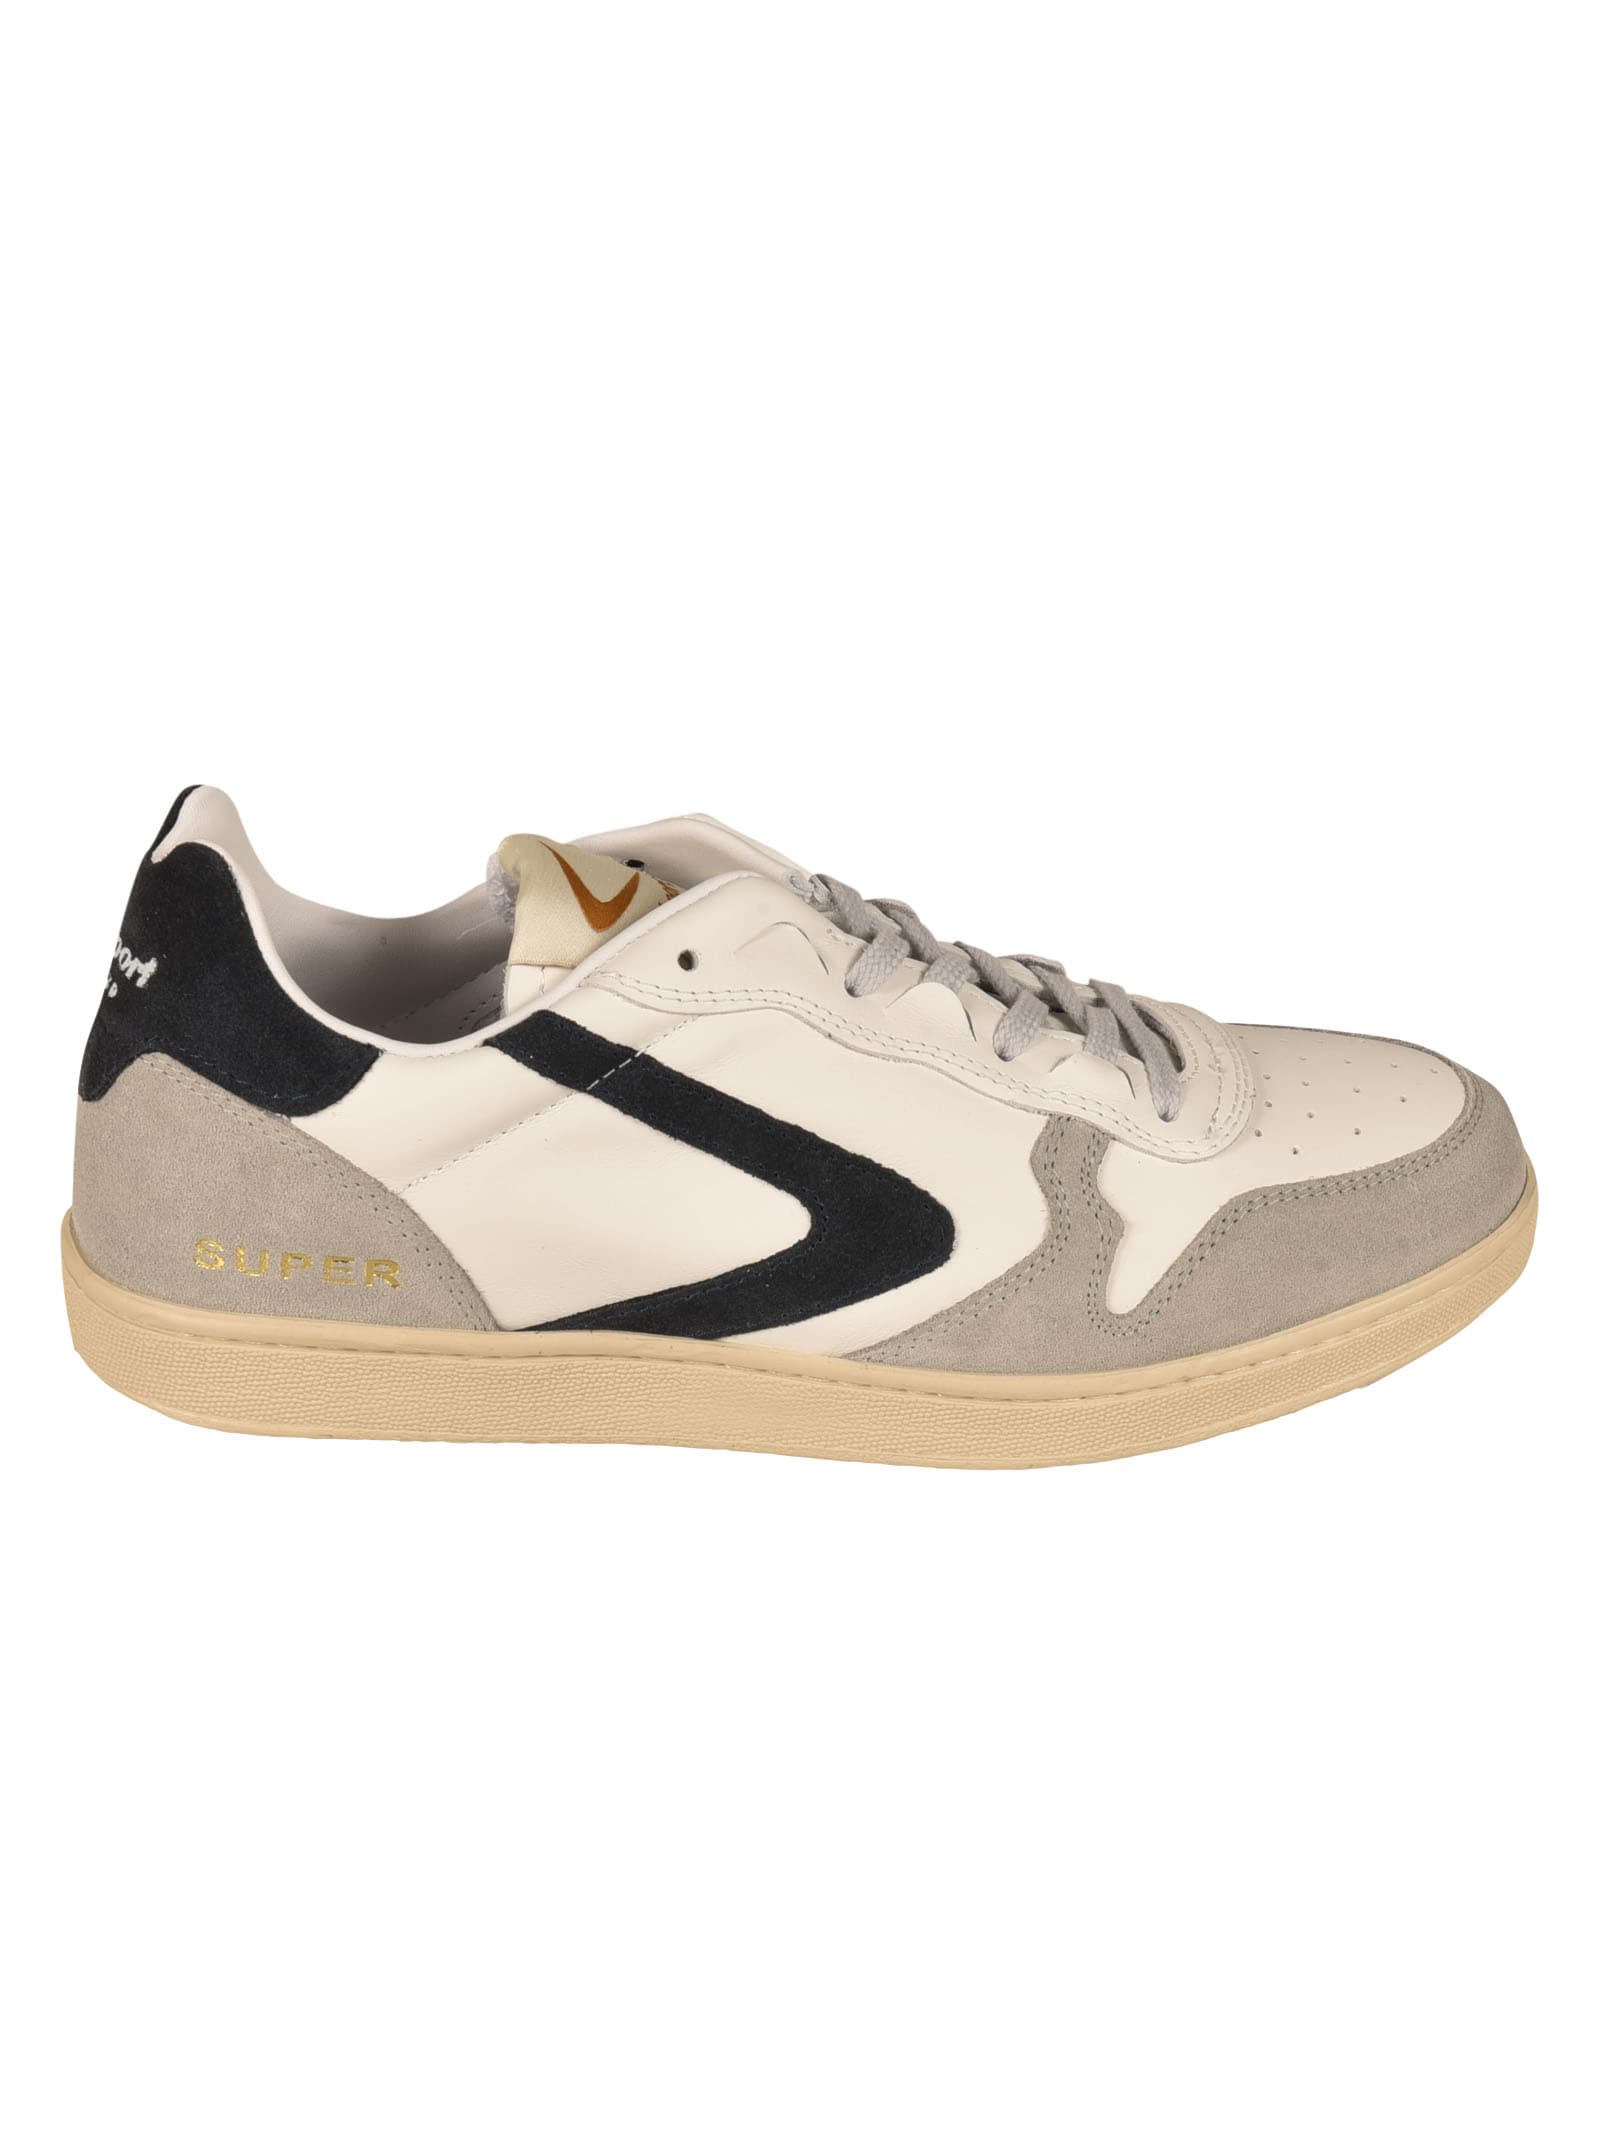 Valsport Super Suede Sneakers In White